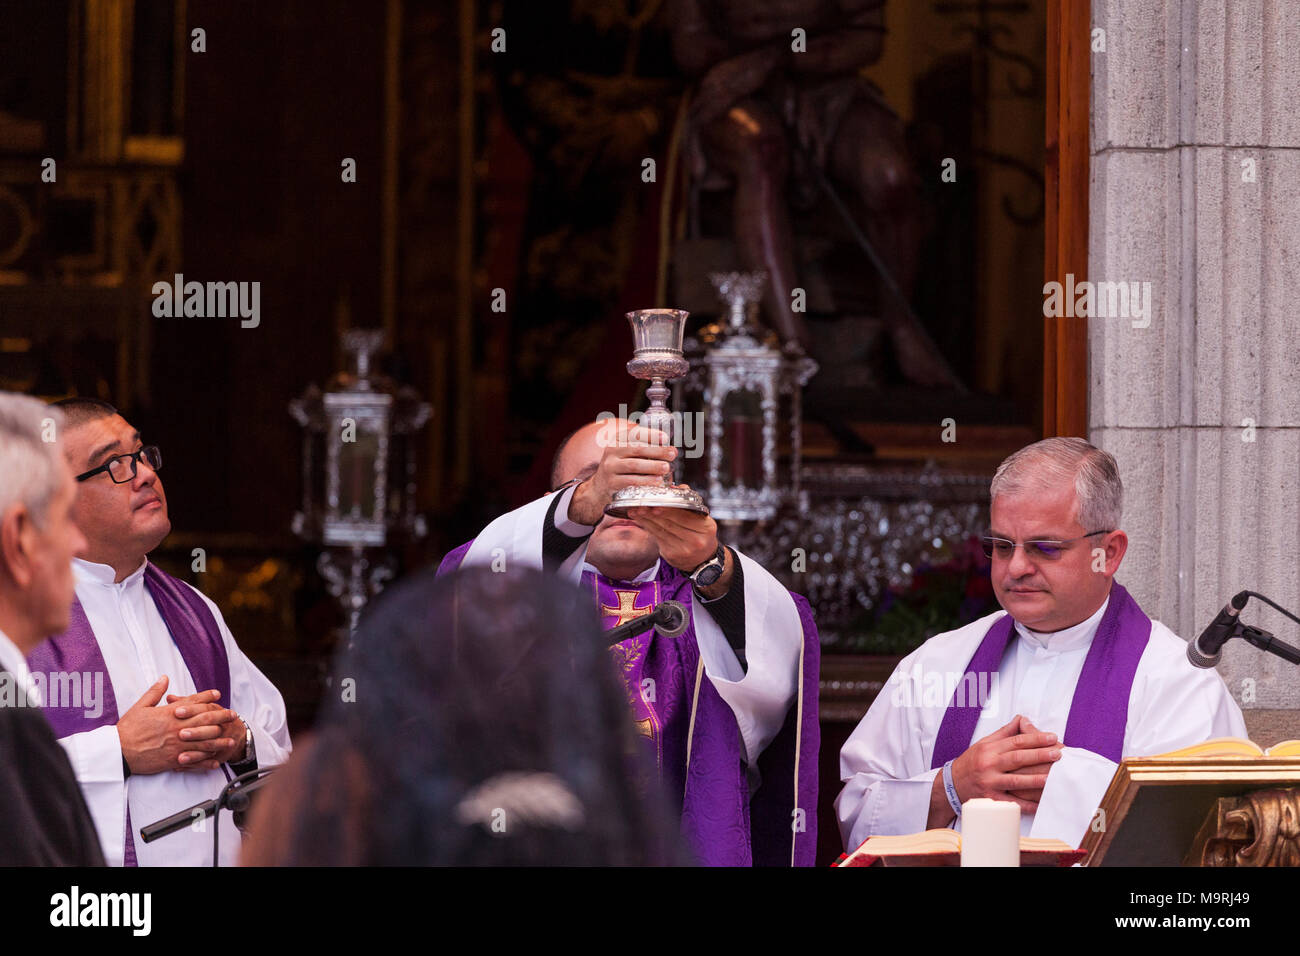 Priest celebrating mass, holding up a chalice of wine, outside the ermita de La Viña in Adeje old town, Tenerife, Canary Islands, Spain Stock Photo